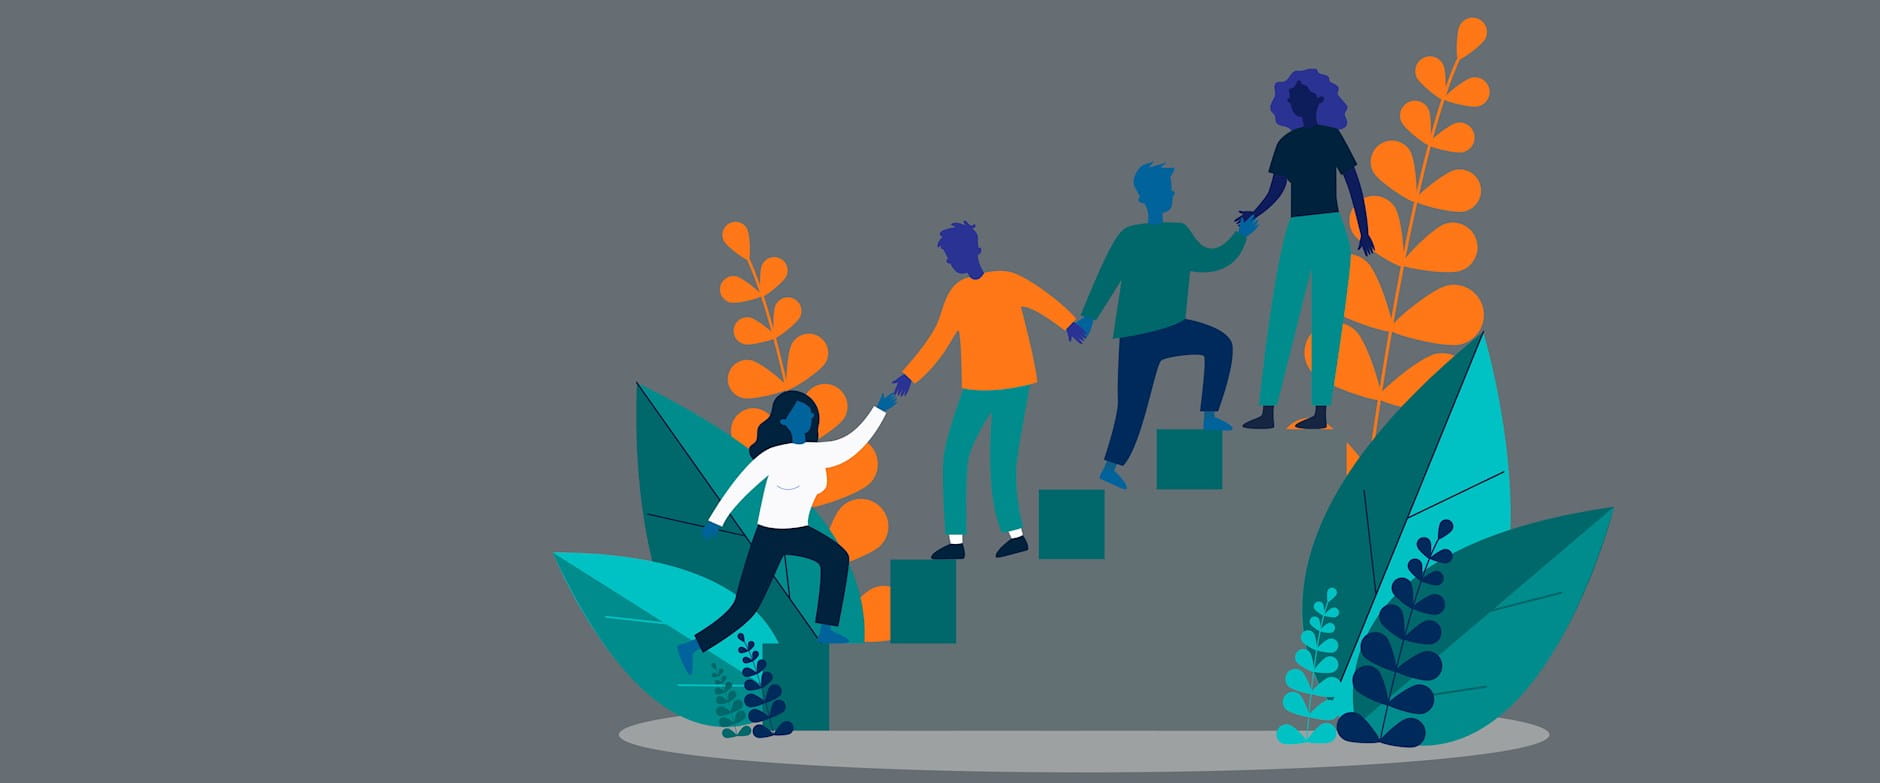 Illustration of people helping each other up steps